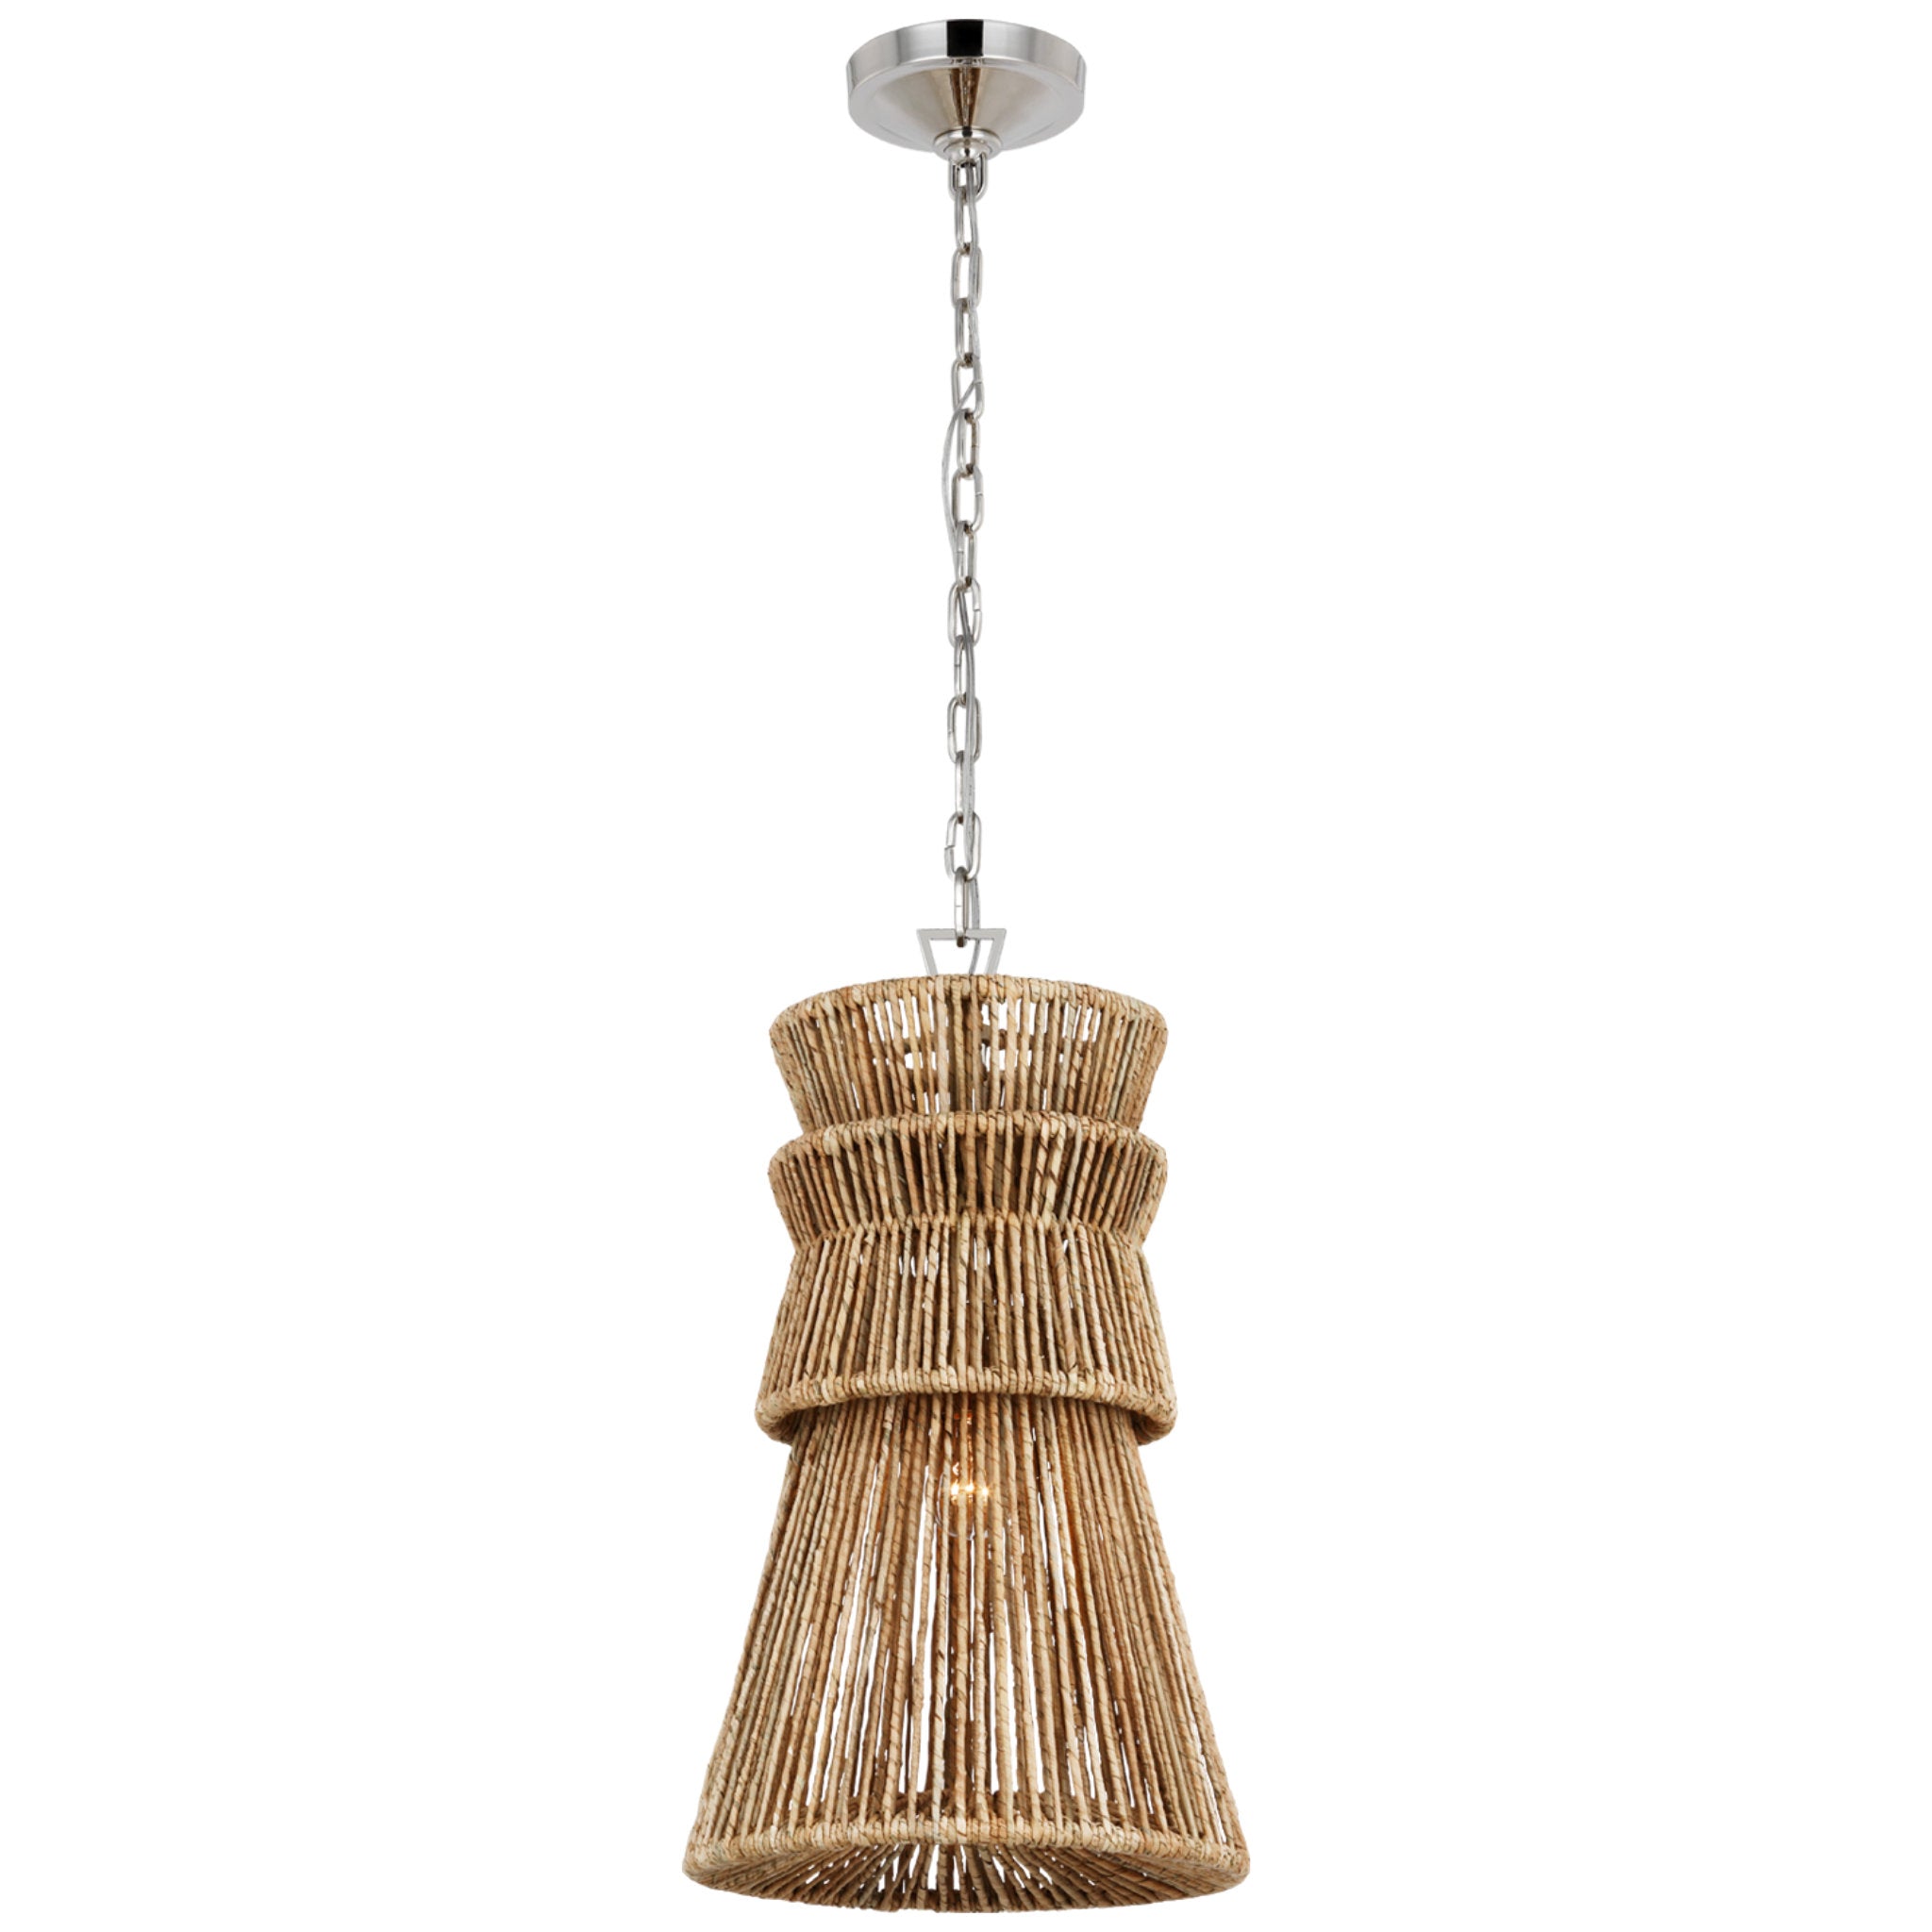 Chapman & Myers Antigua 13" Pendant in Polished Nickel and Natural Abaca